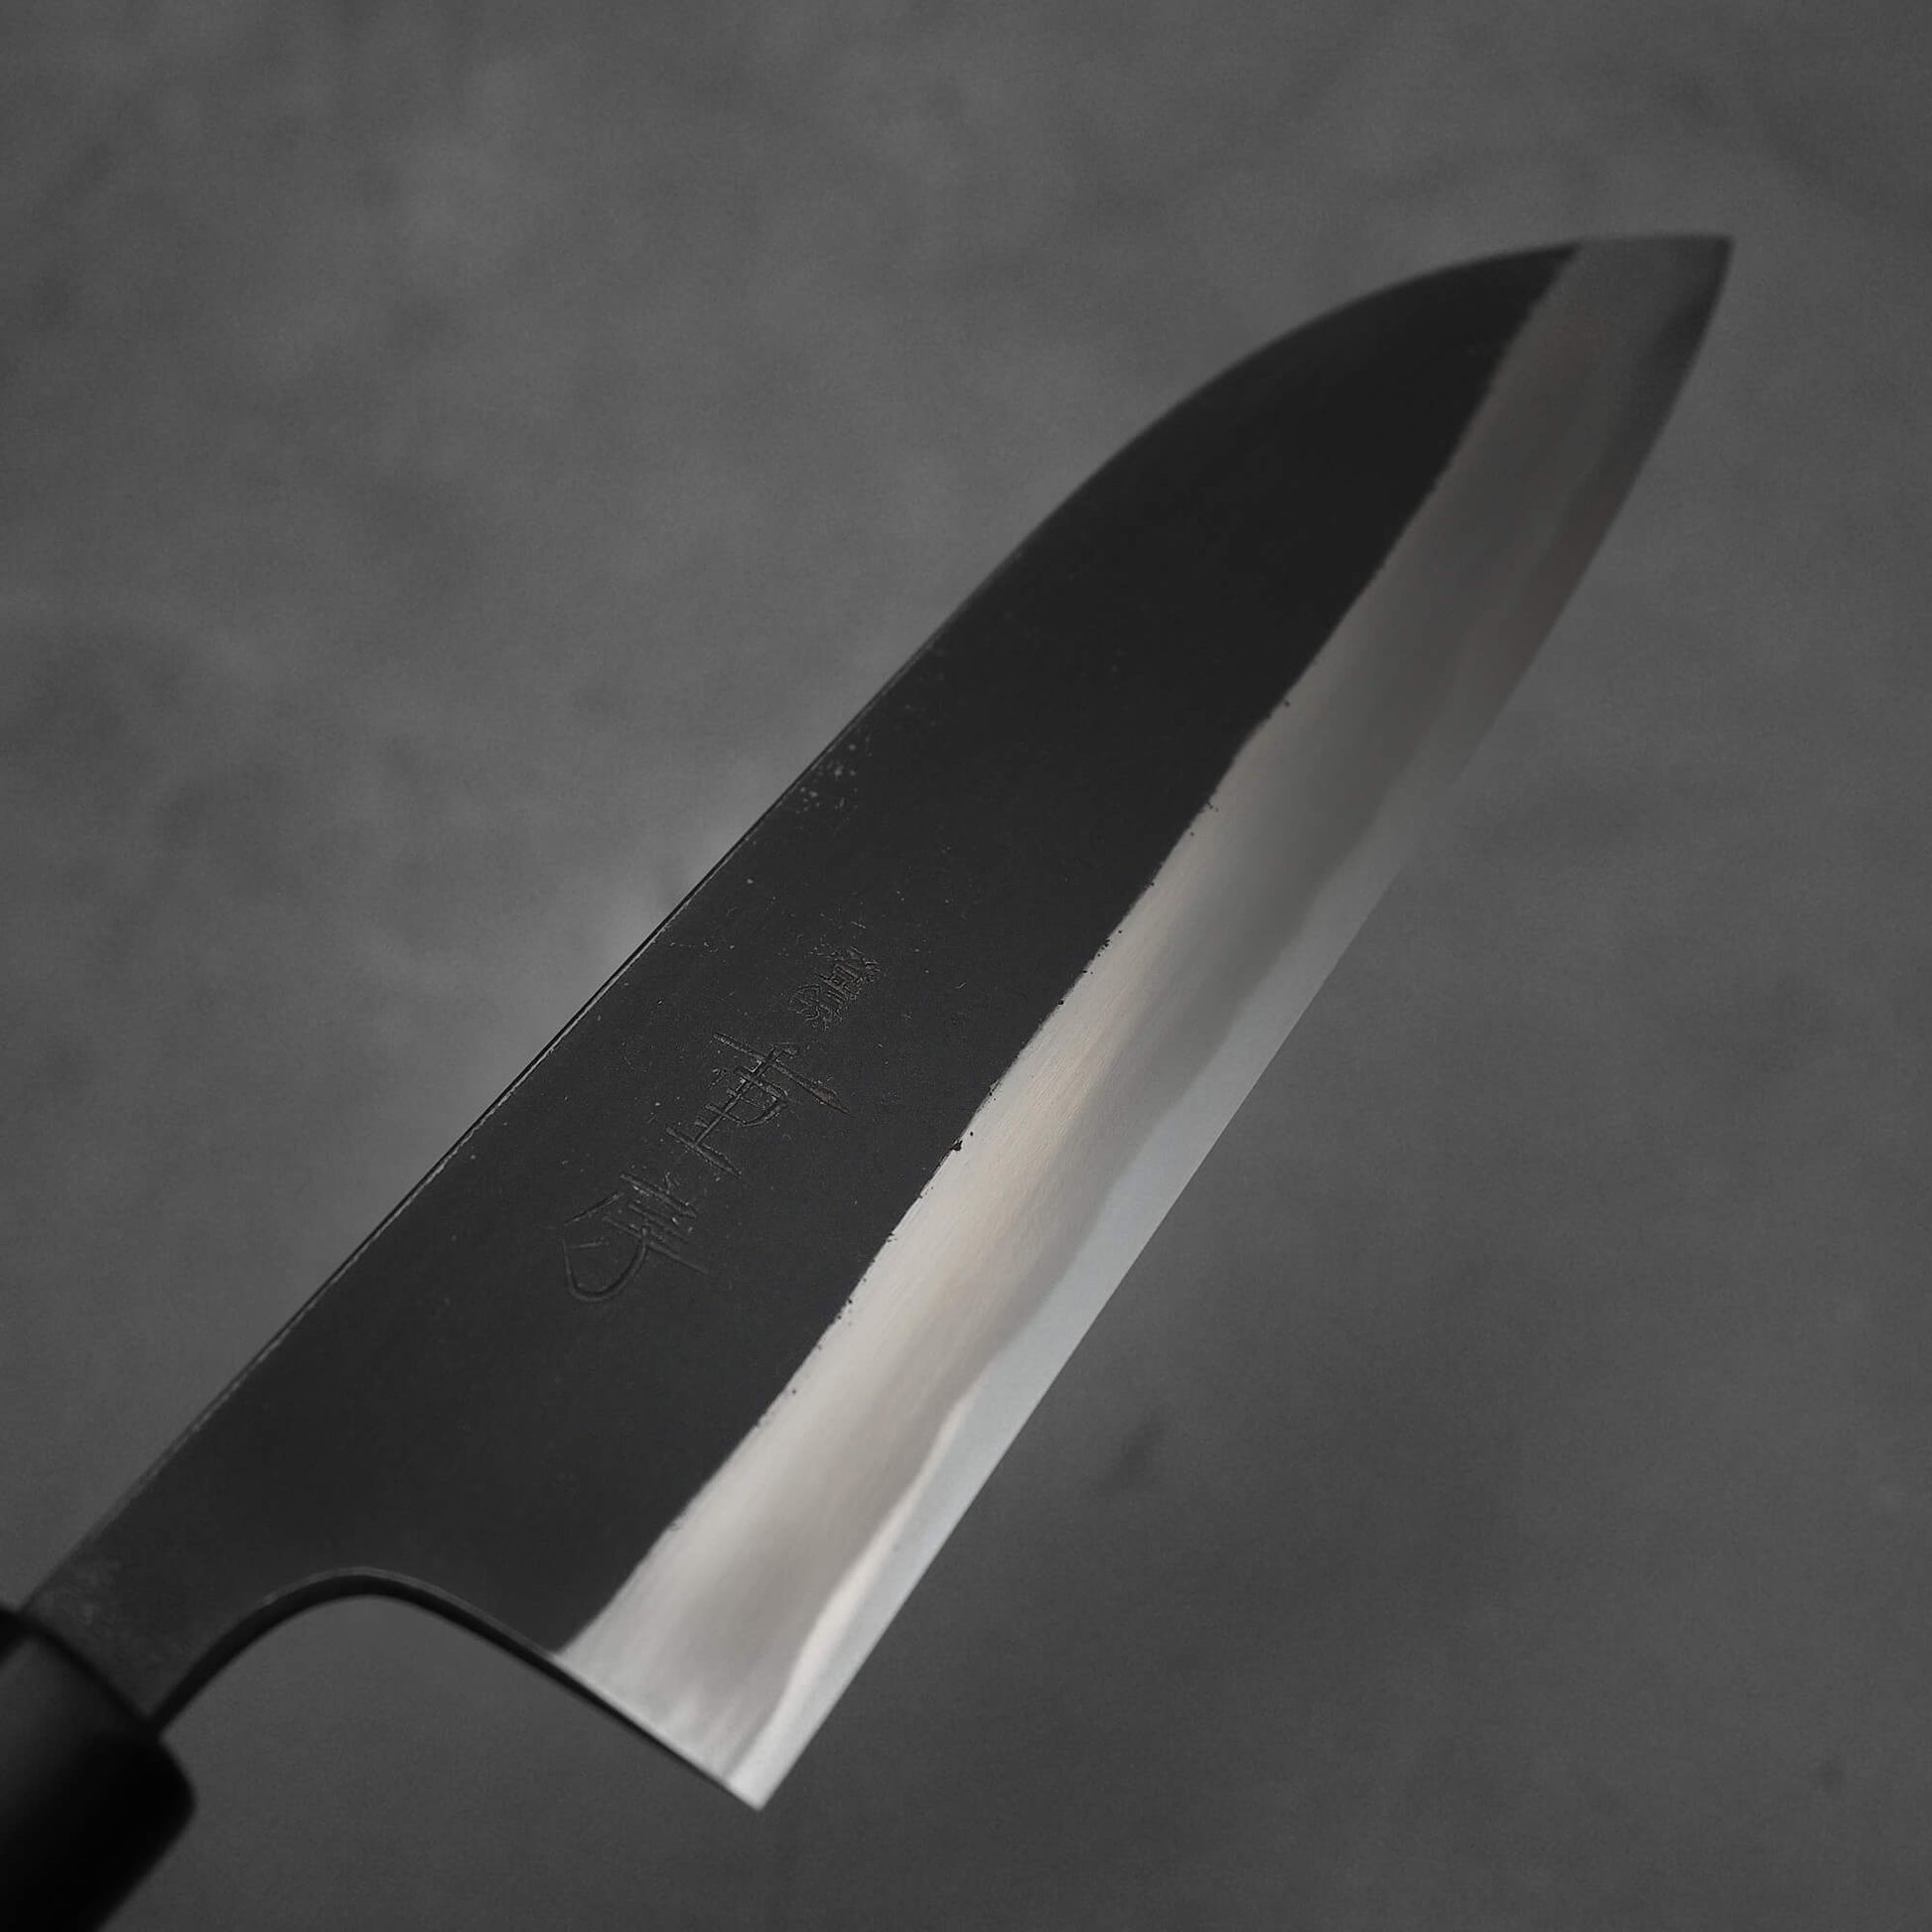 Top view of the blade of Shigefusa kurouchi 165mm santoku. Image focuses on the right side of the blade